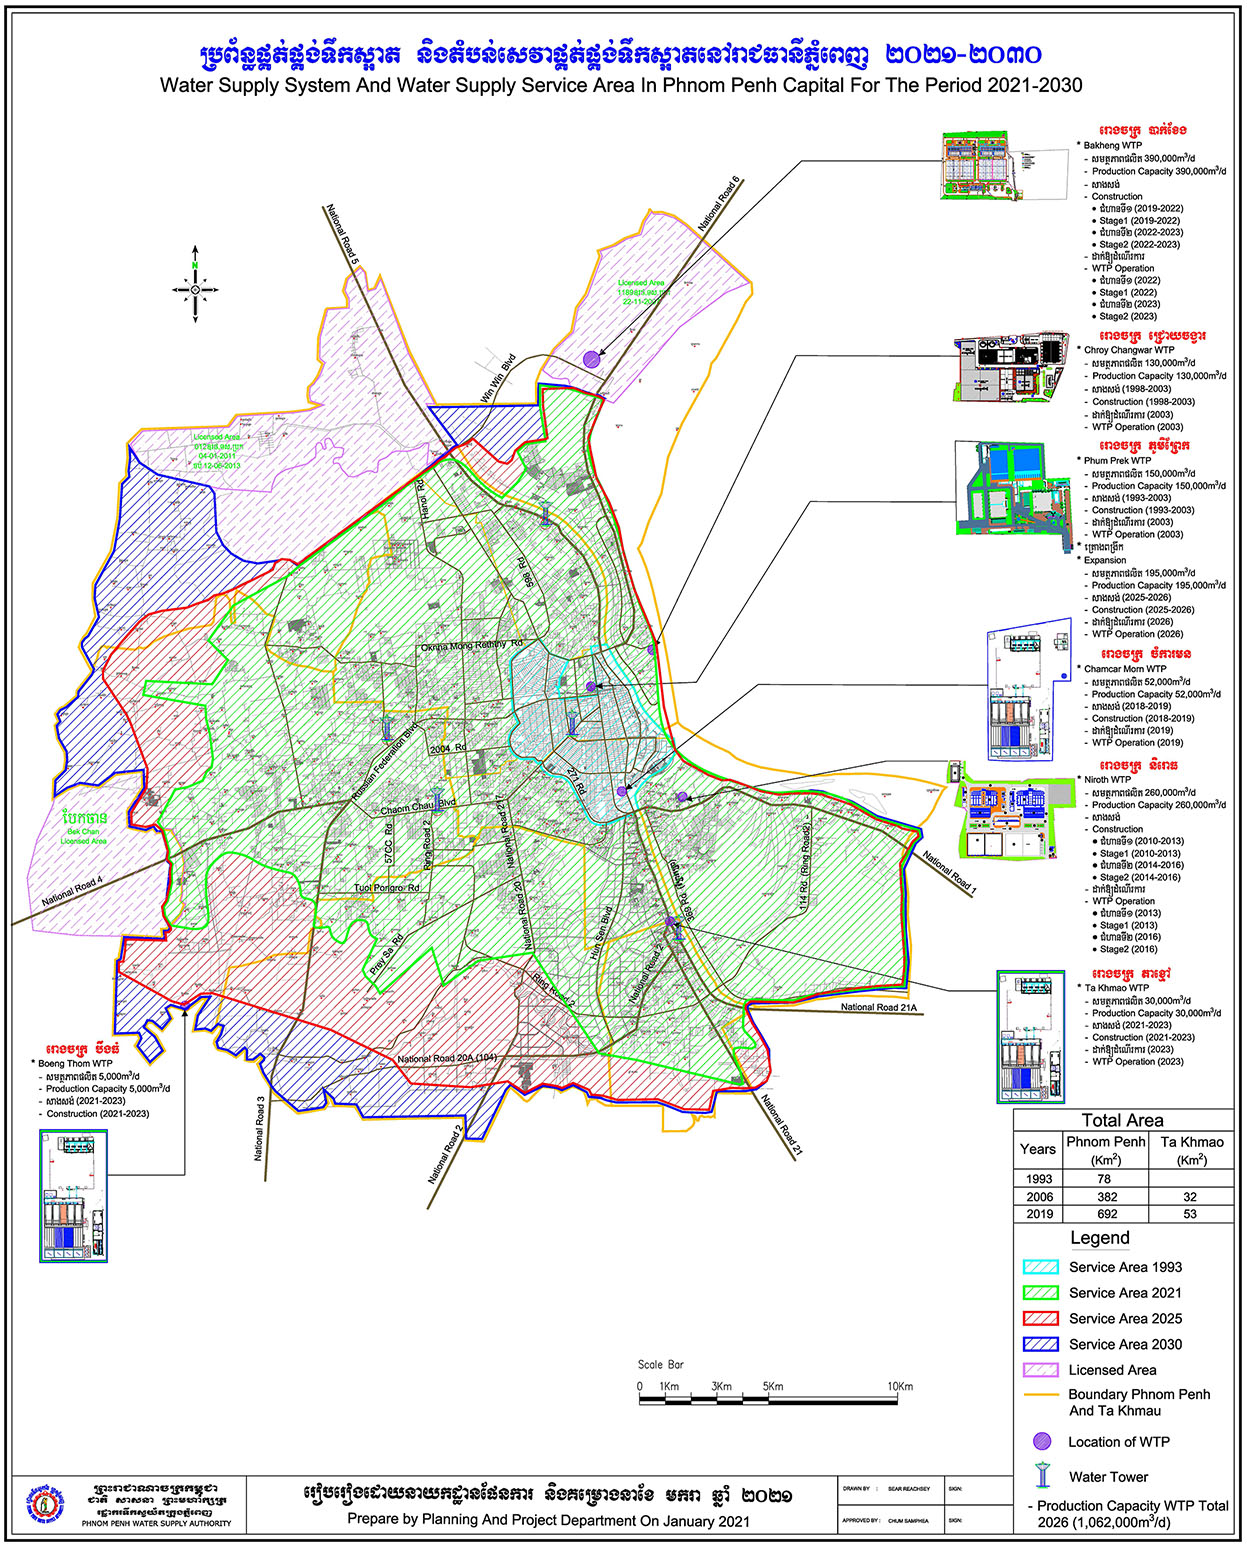 Service Coverage and Expansion Plan 2016-2021